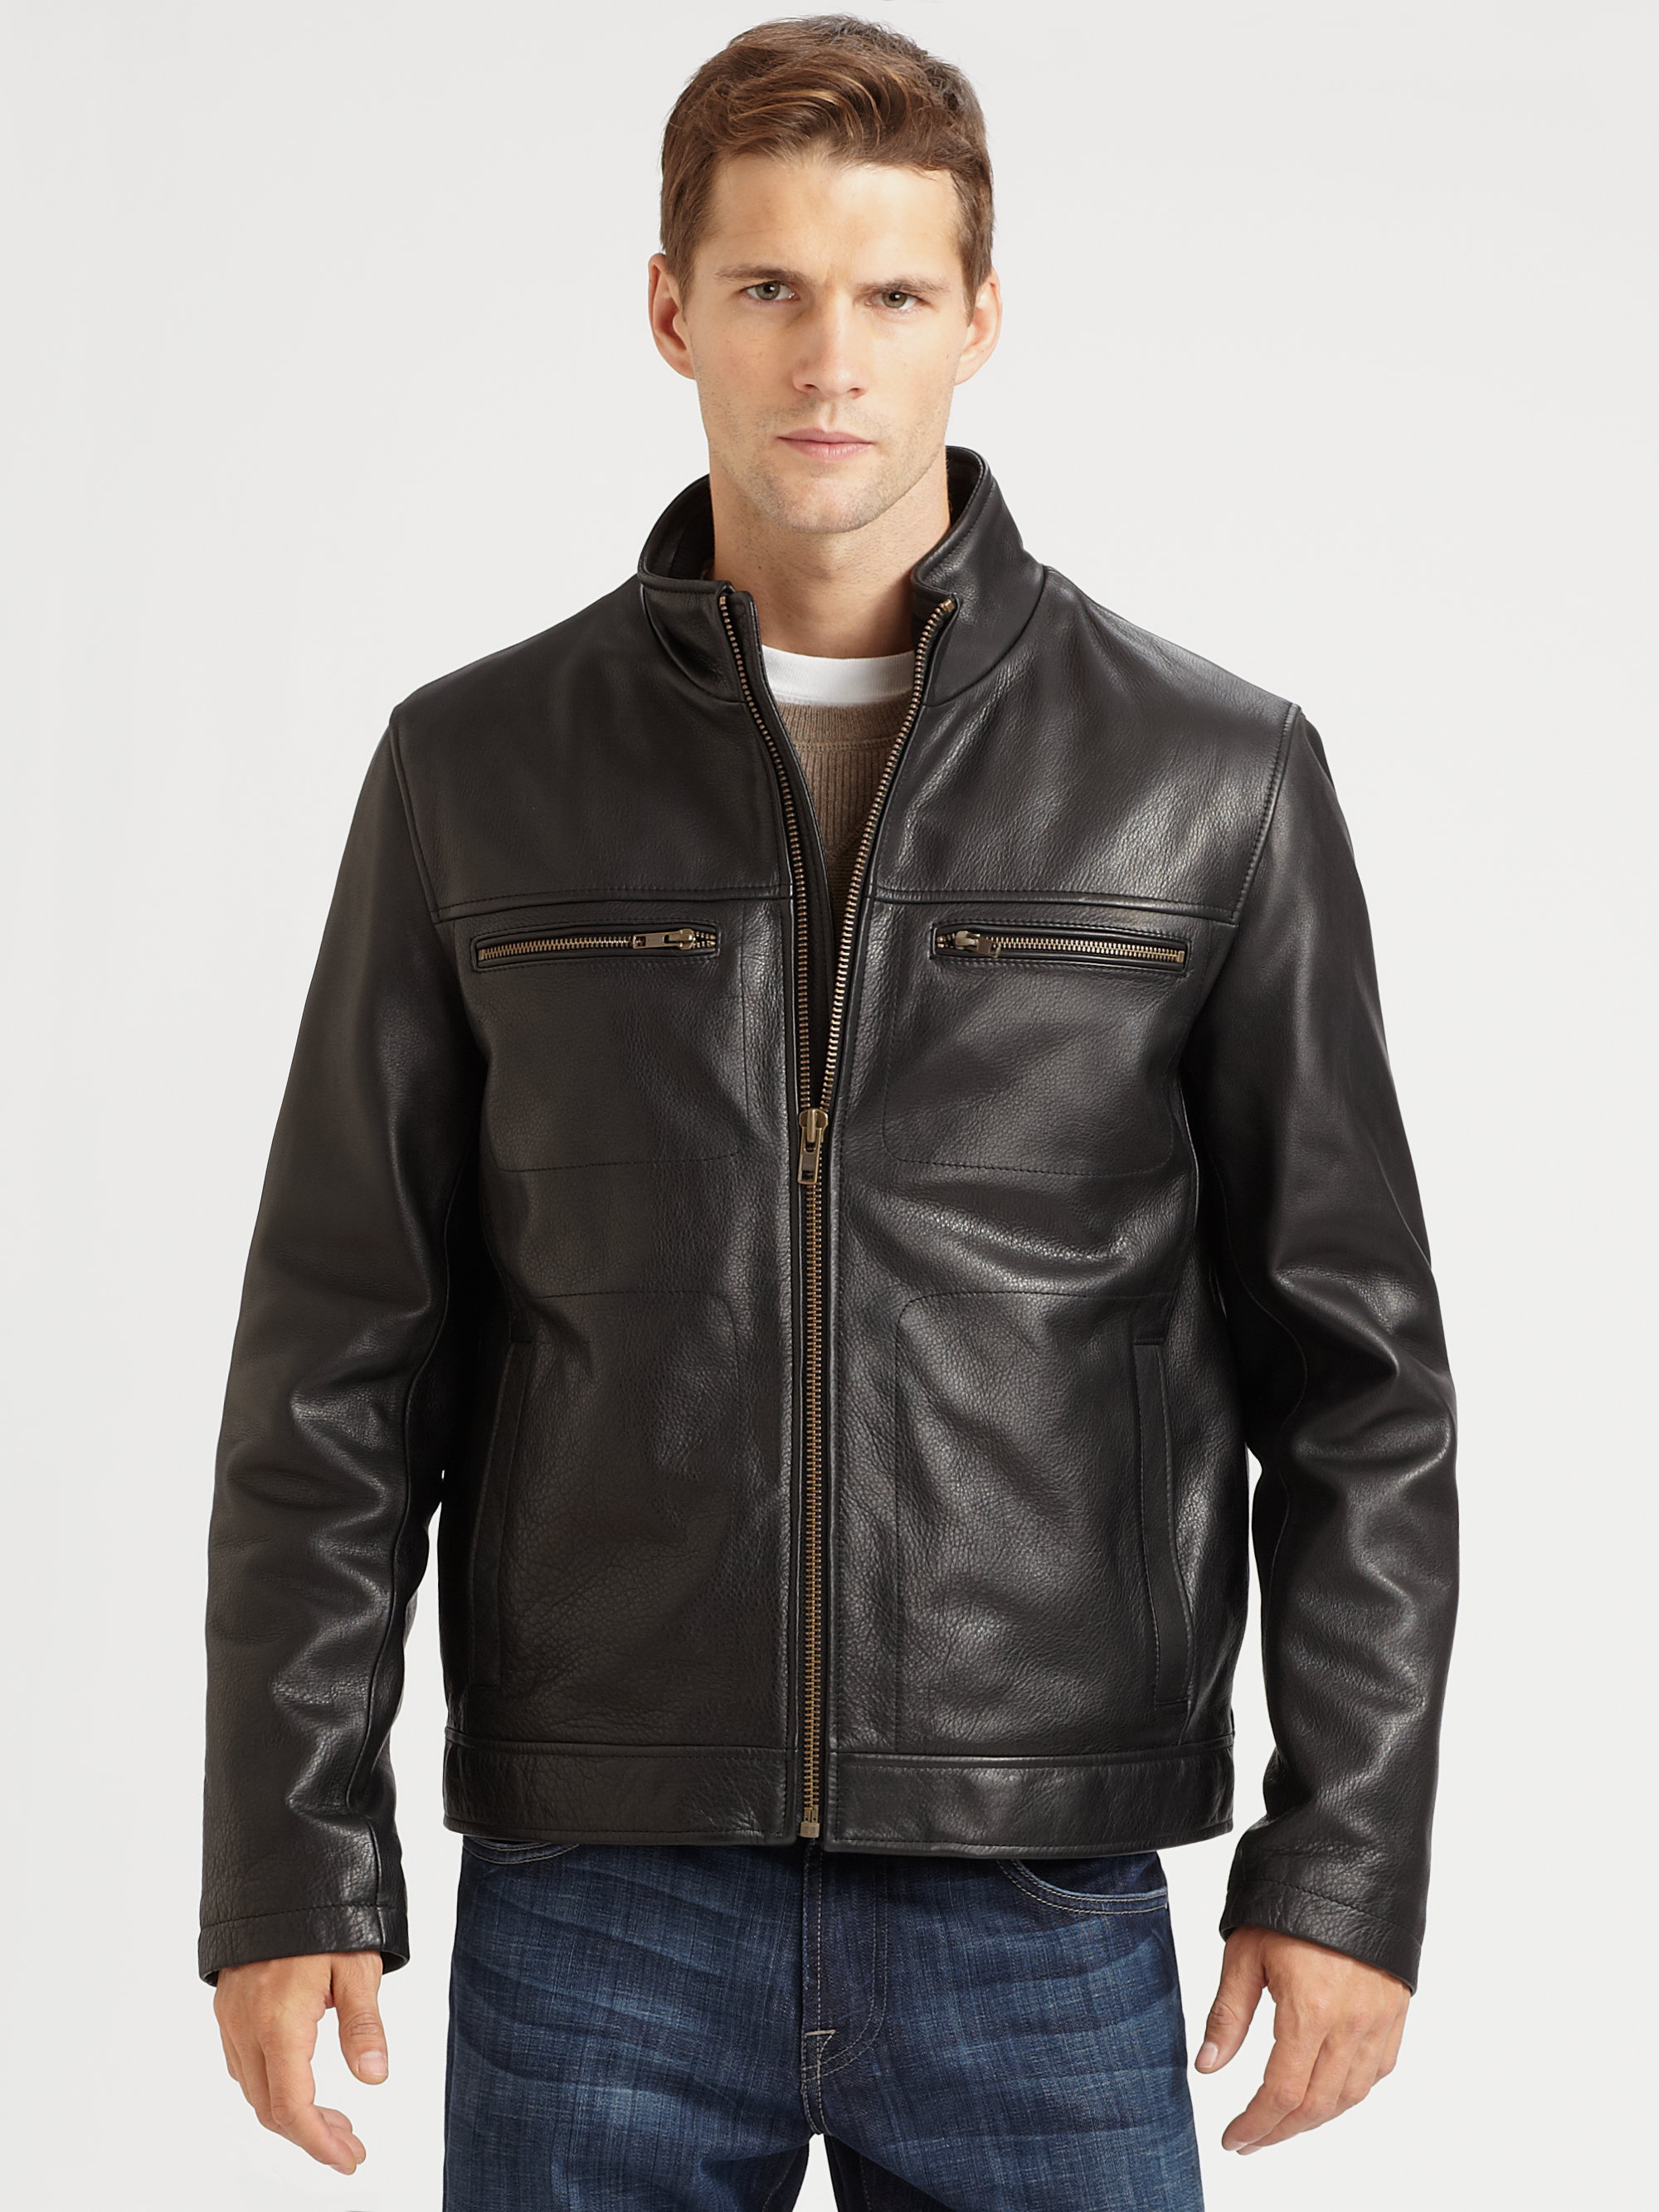 Lyst - Cole Haan Grainy Leather Moto Jacket in Black for Men